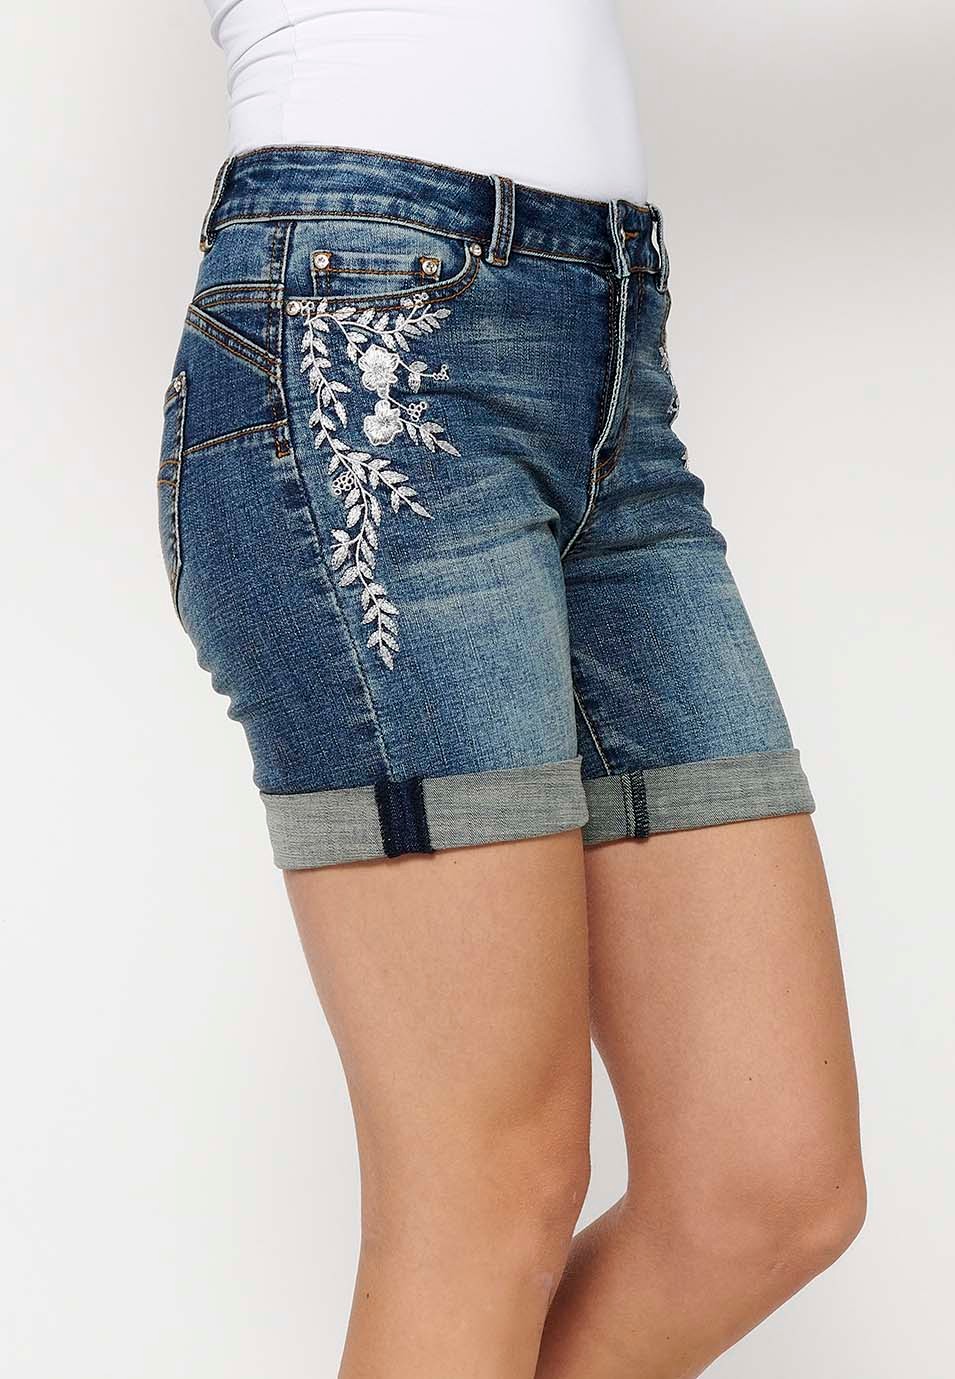 Short shorts with a turn-up finish with front zipper and button closure and blue floral embroidery for Women 4